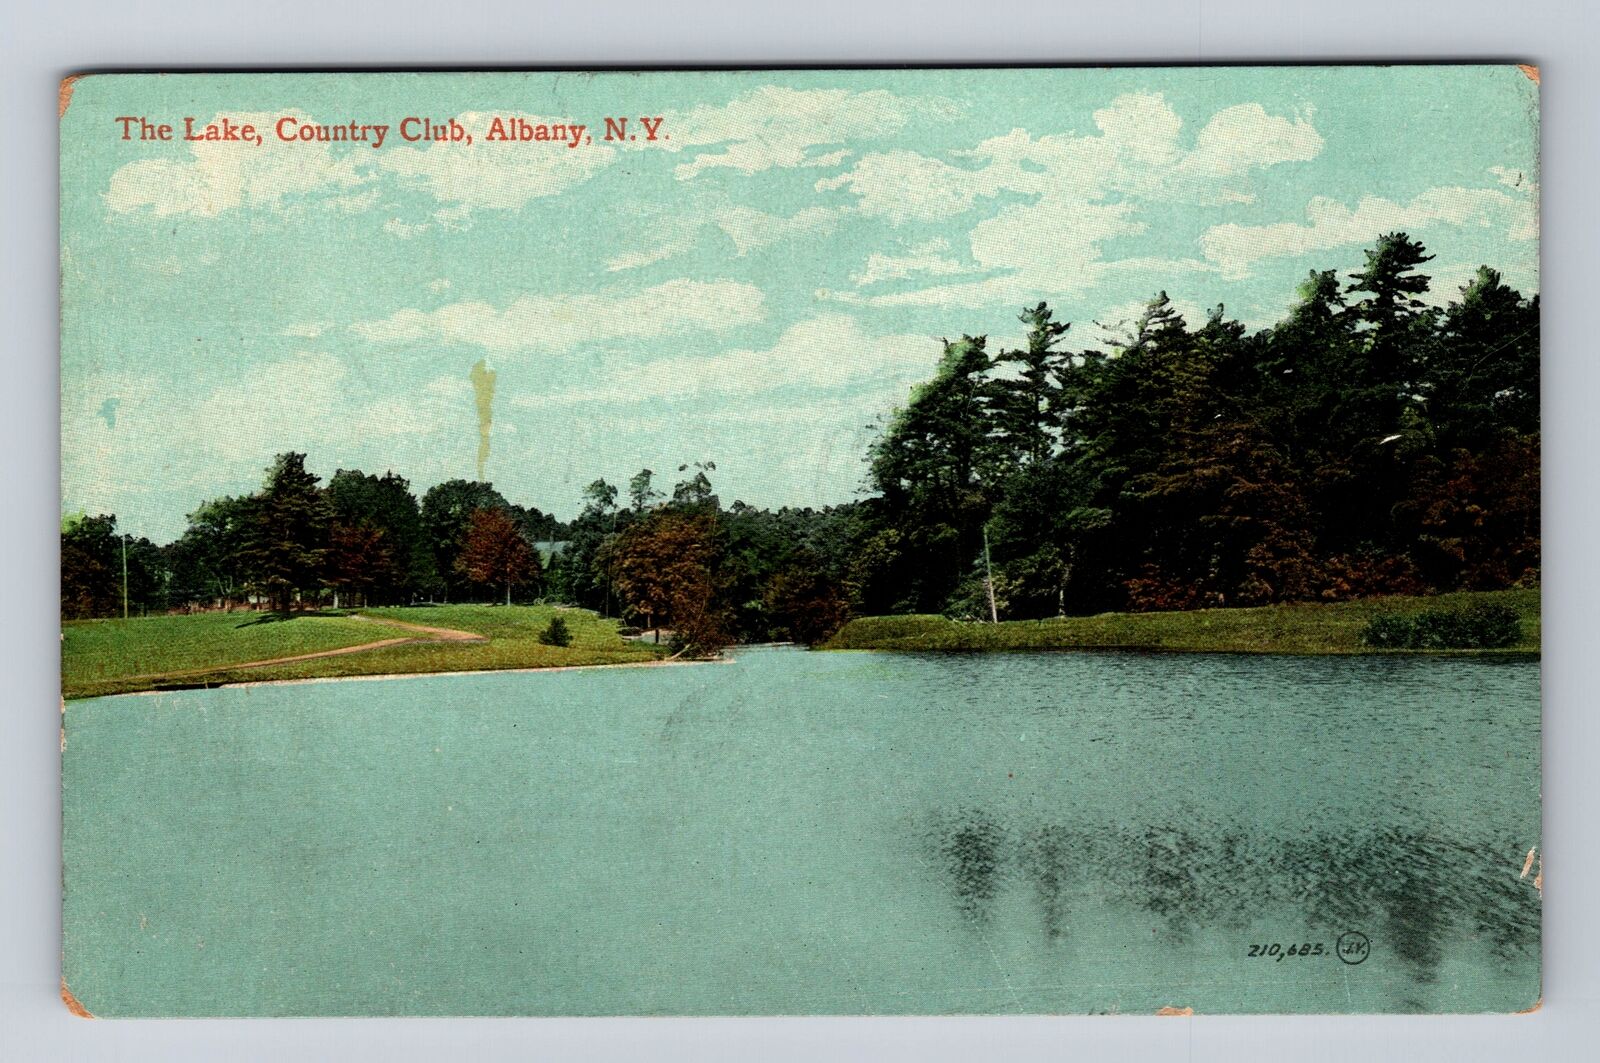 Albany NY-New York, Scenic View Country Club, the Lake, Vintage Postcard